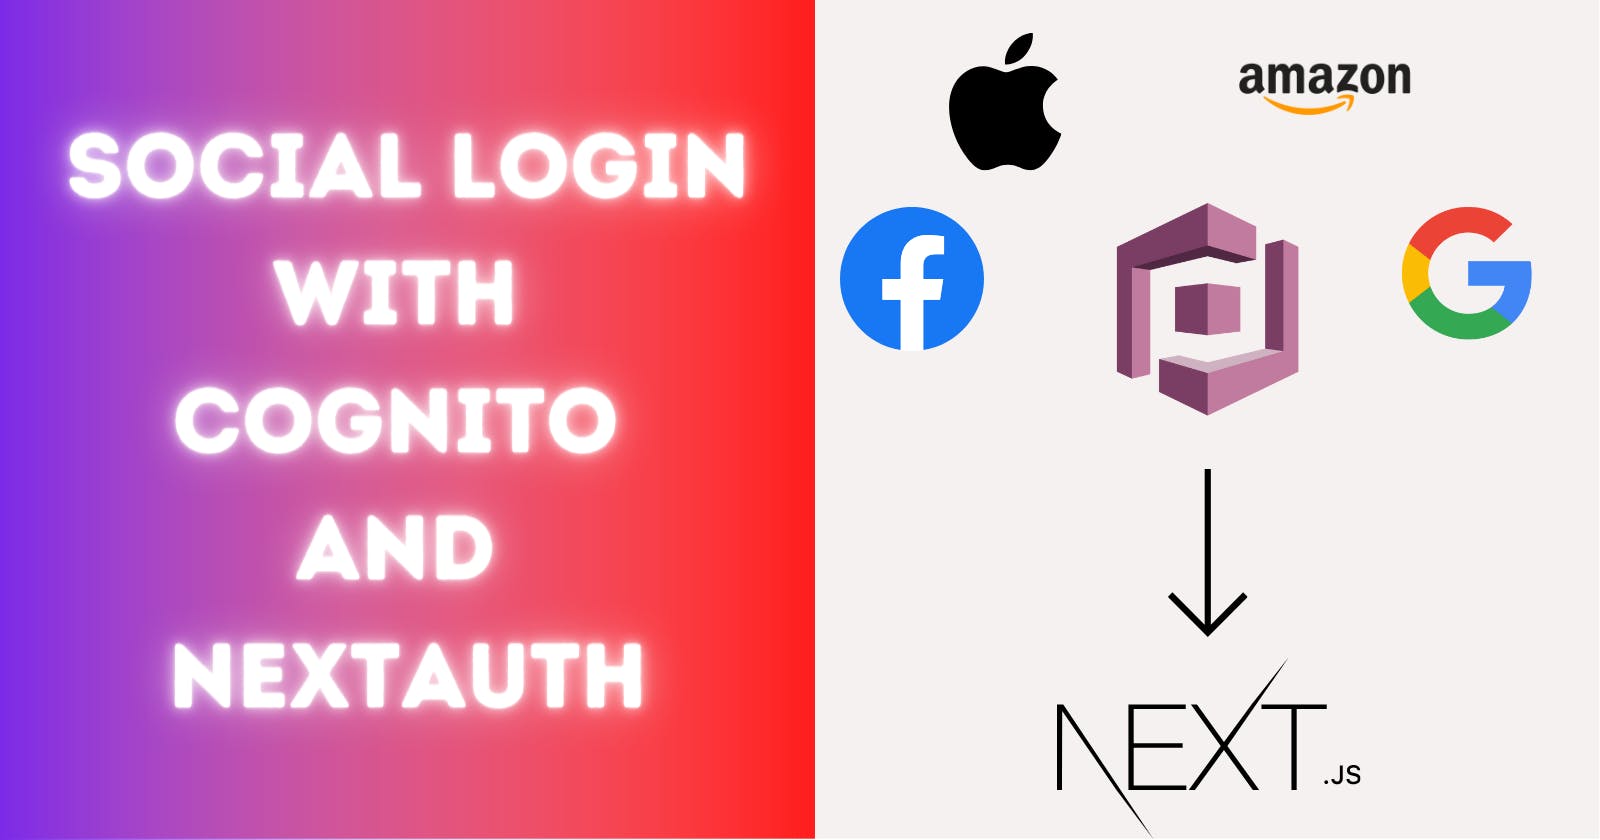 Social Login With Cognito and NextAuth